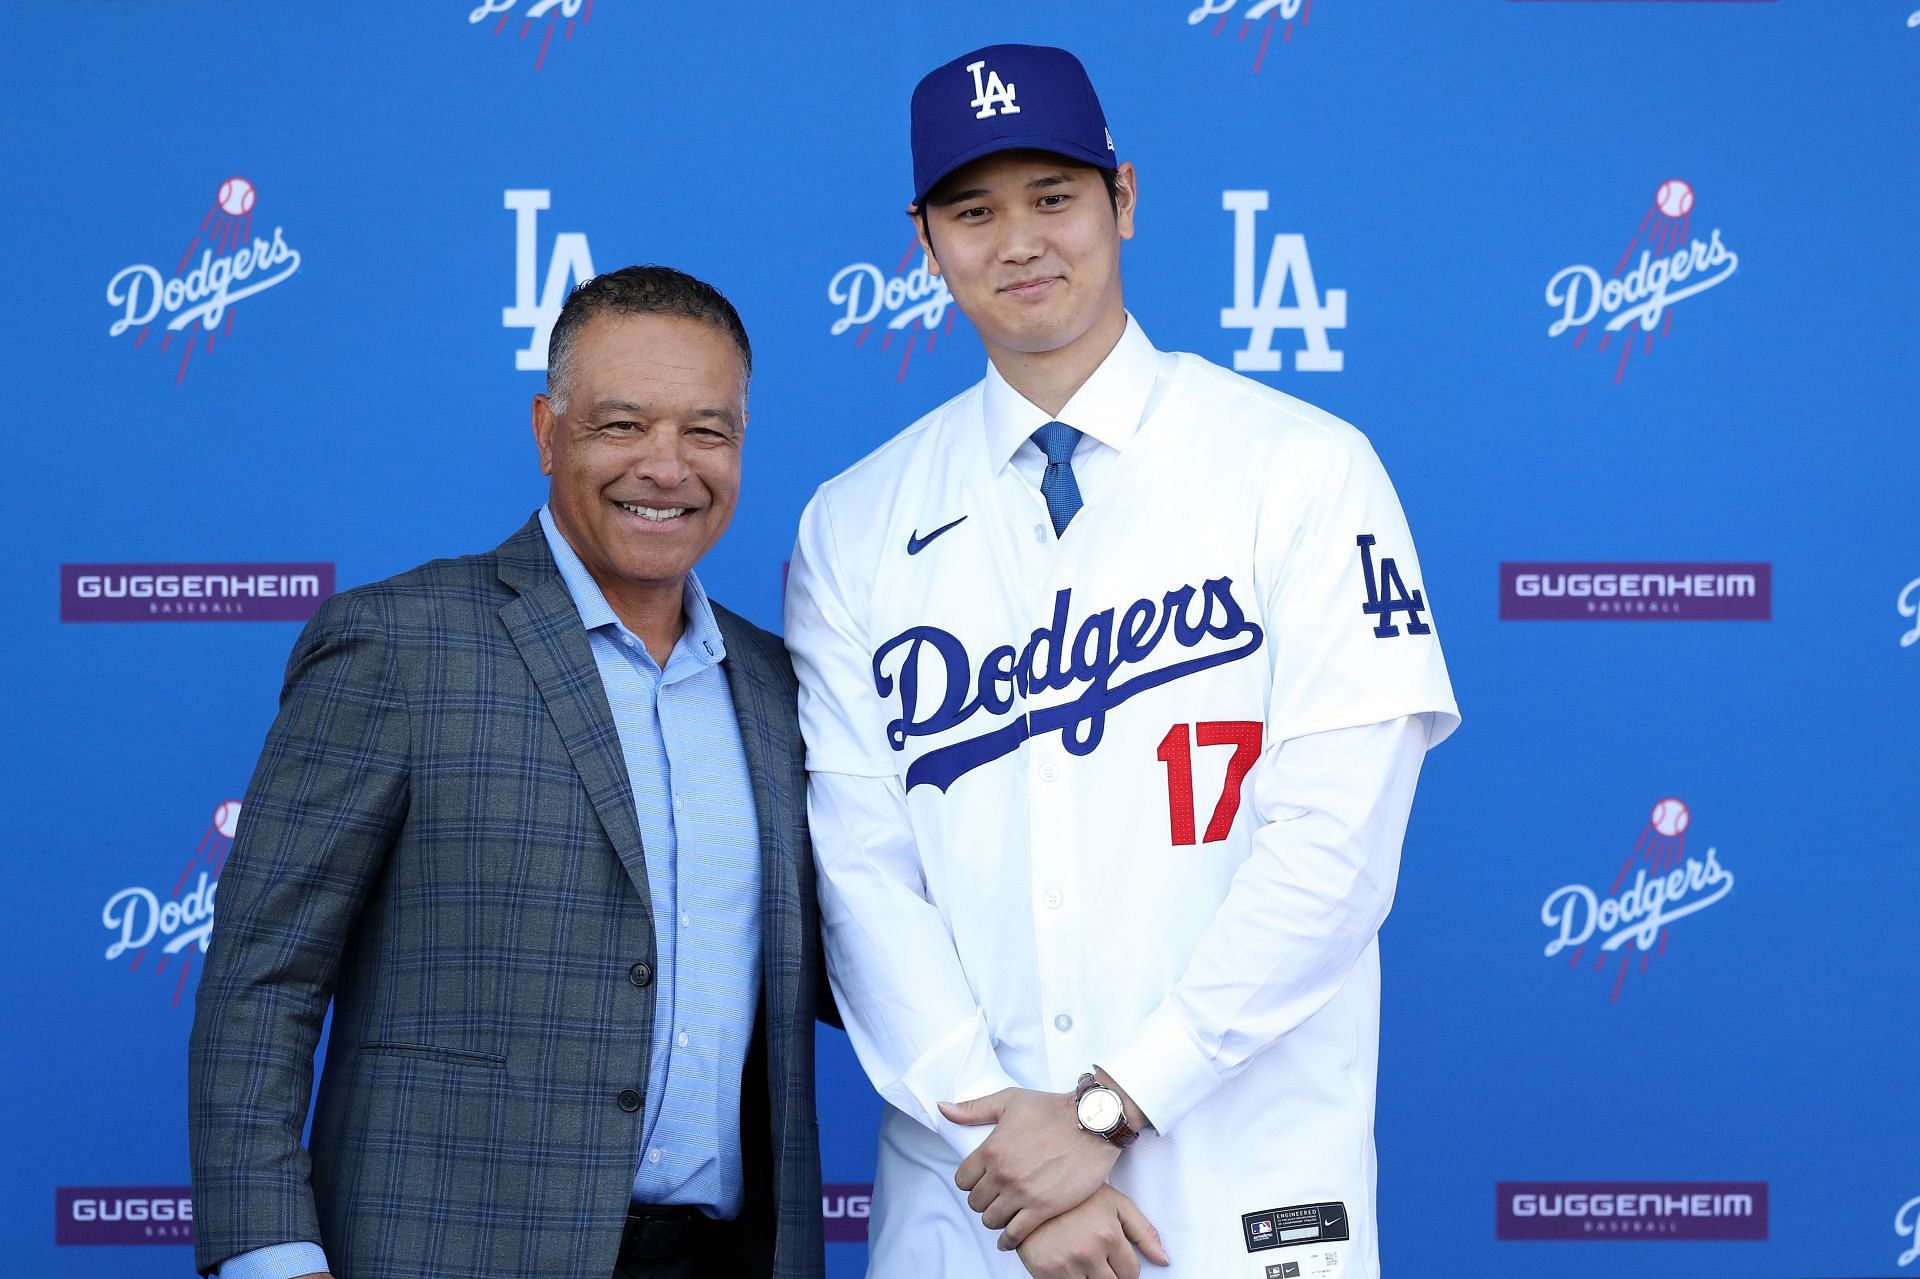 Shohei Ohtani&rsquo;s $700 million contract with the Dodgers will se him earn only $2 million yearly between 2034-2043